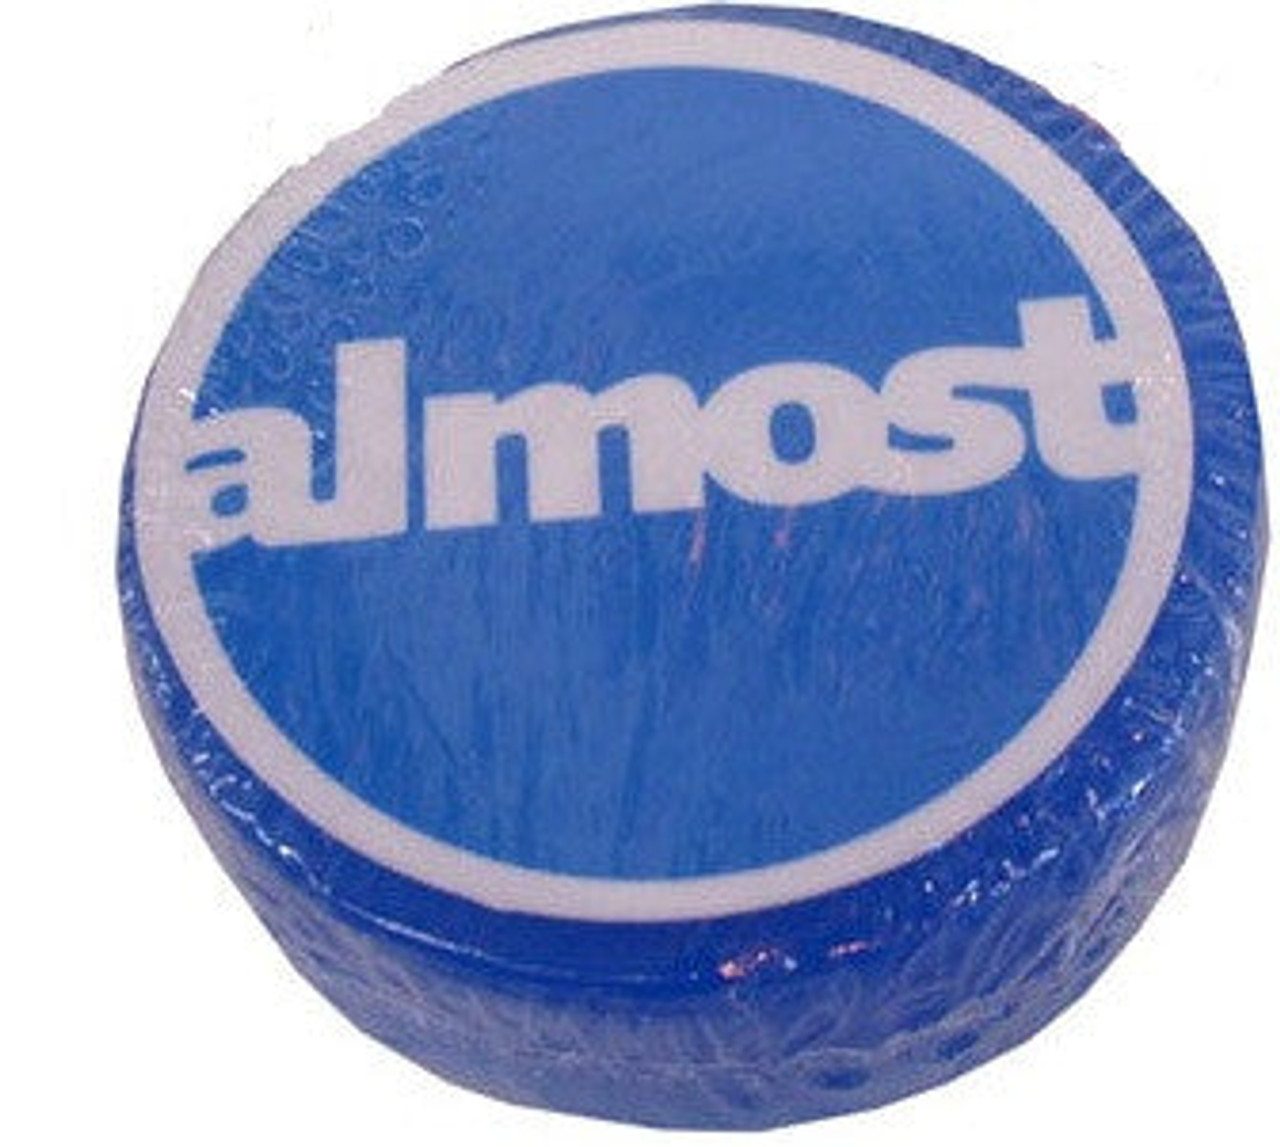 Almost Skate Wax — Goofball Sk8boards